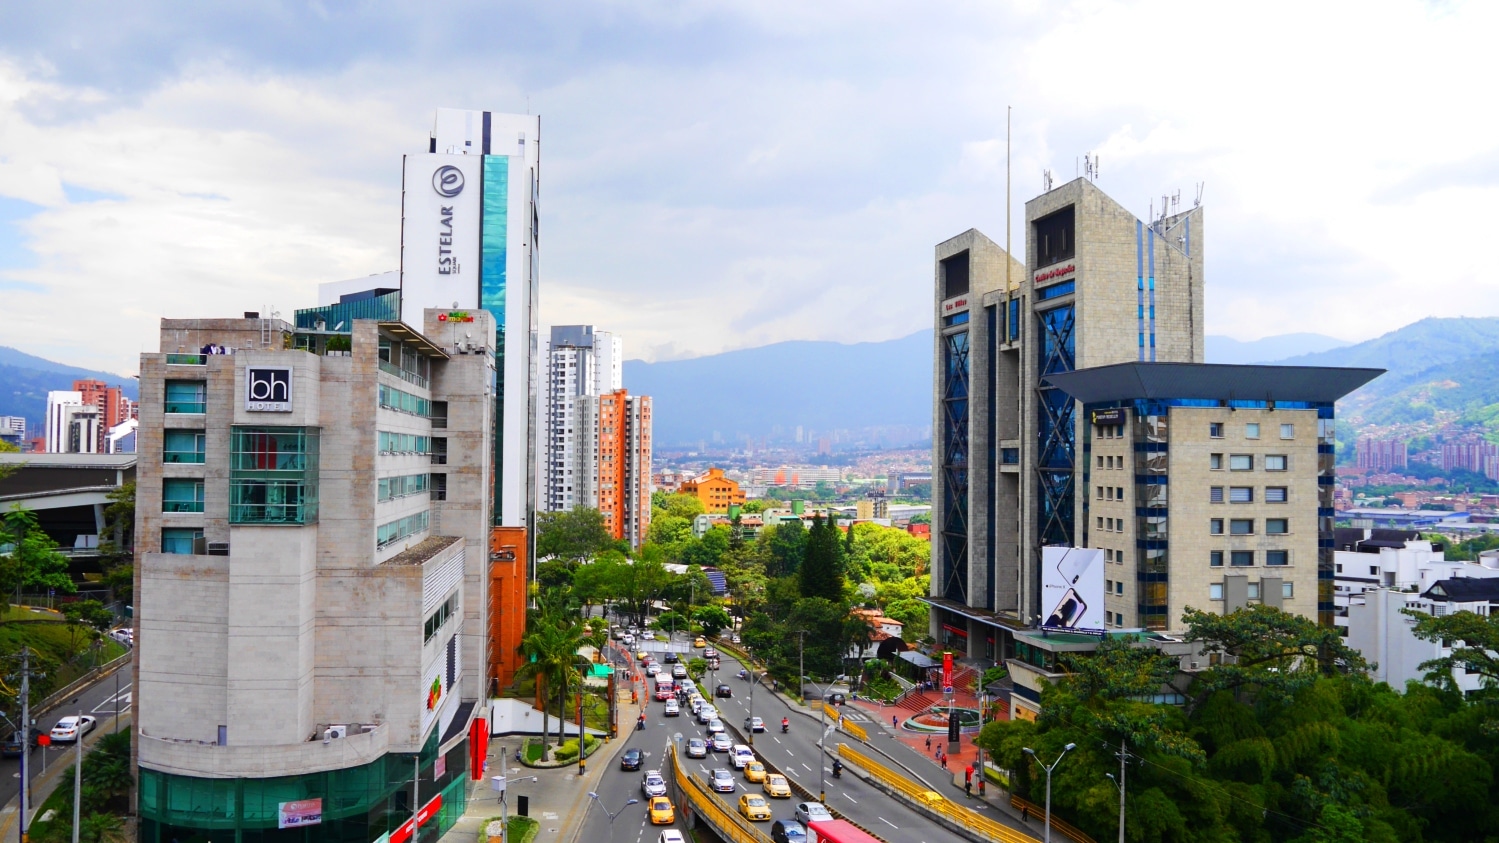 The Best Things to See & Do in El Poblado, Medellín in 2023